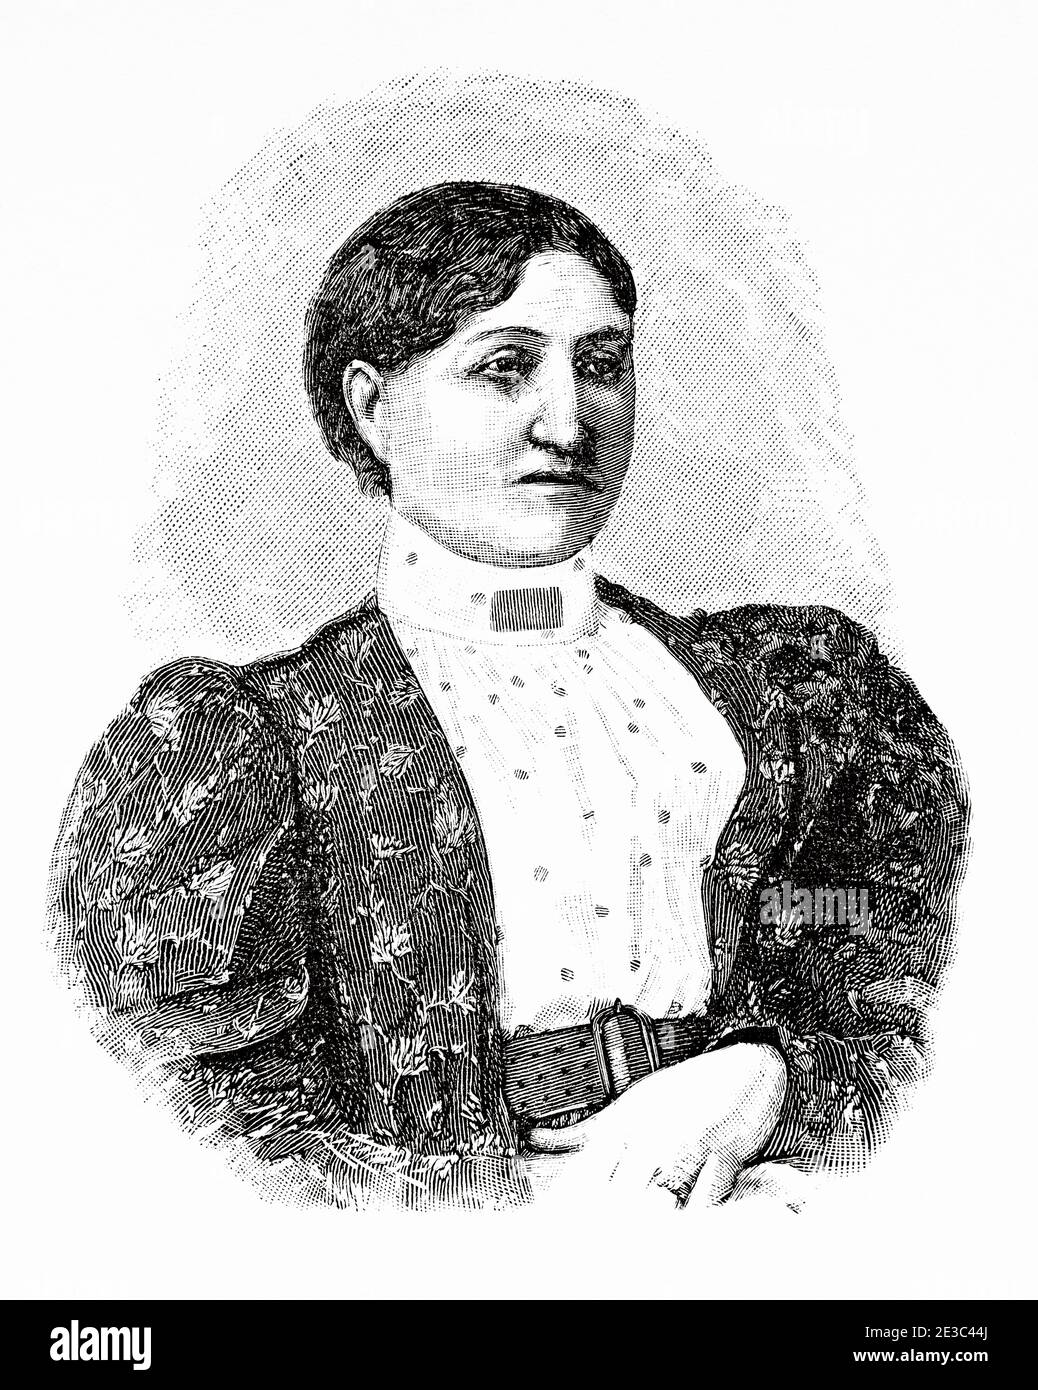 Portrait of Elizabeth Yates (Oman 1845 - 1918) was the mayor of Onehunga borough in New Zealand for most of 1894. She was the first female mayor anywhere in the British Empire. Old XIX century engraved illustration from La Ilustracion Española y Americana 1894 Stock Photo